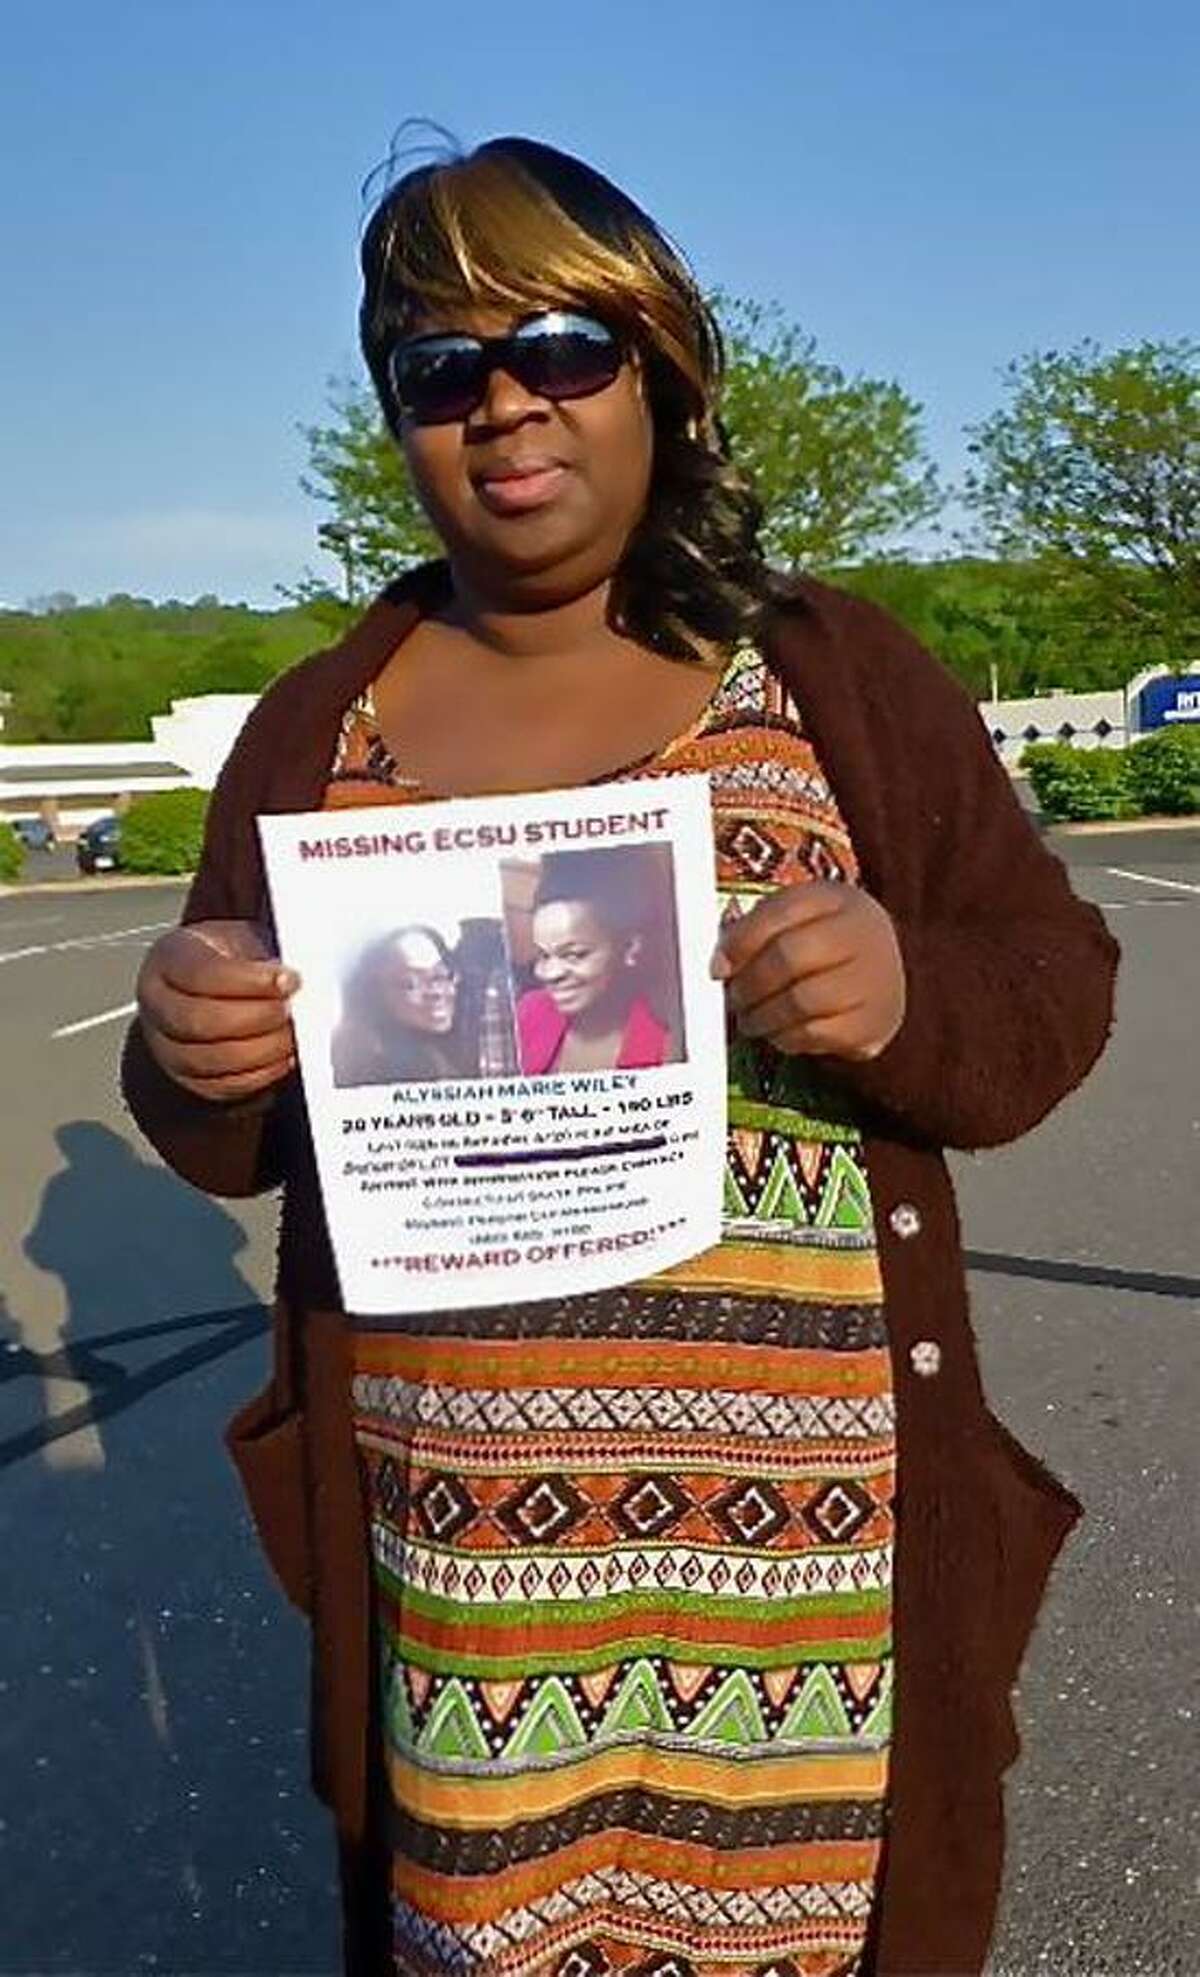 Corinna Martin, the mother of missing ECSU student Alyssiah Marie Wiley, holds her daughter's missing person poster Wednesday. Patricia Villers/Register file photo